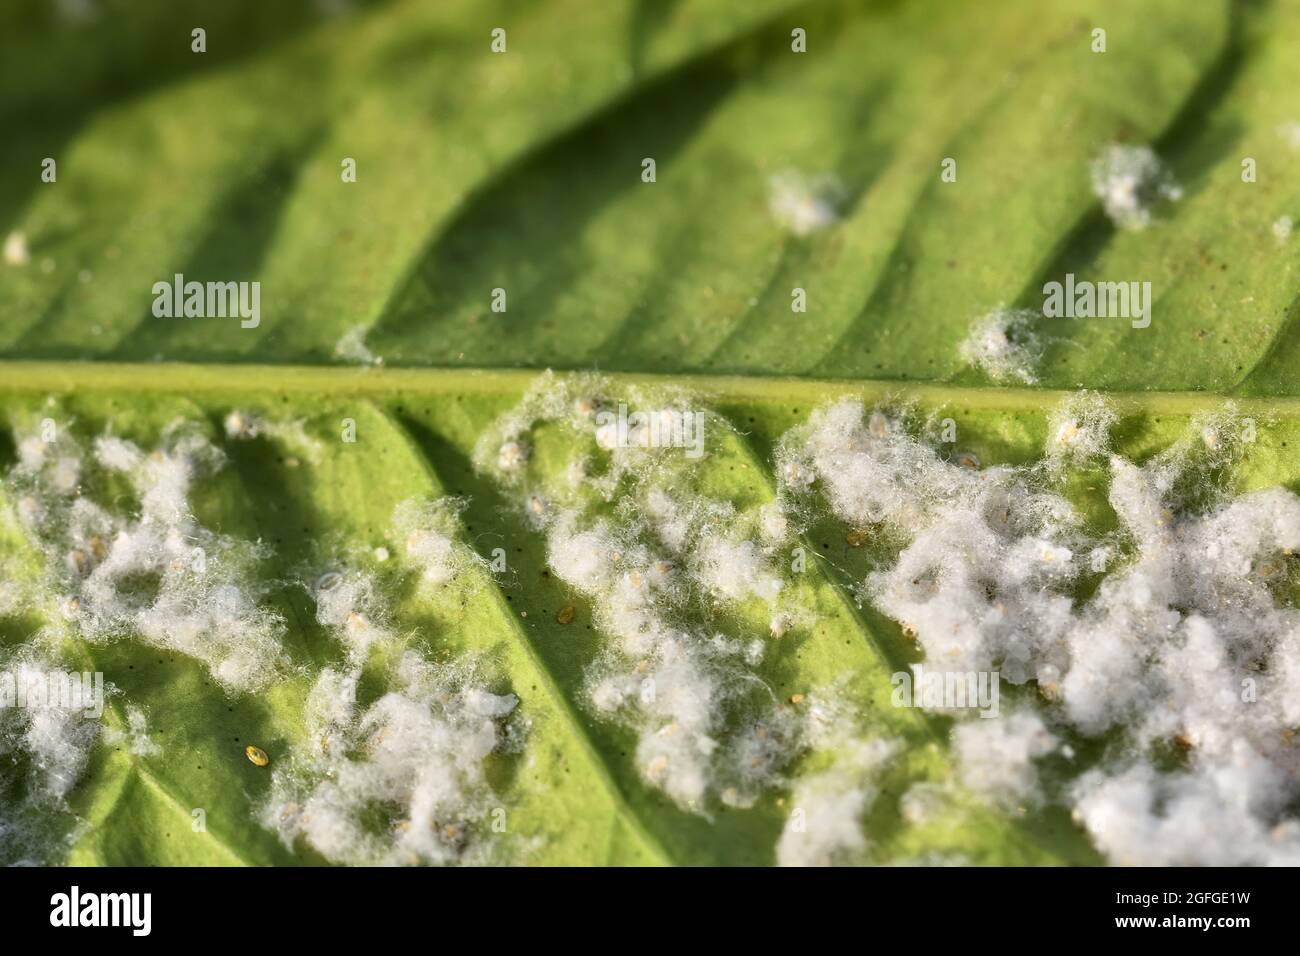 Detail of an orange tree leaf infested by the whitefly pest Stock Photo